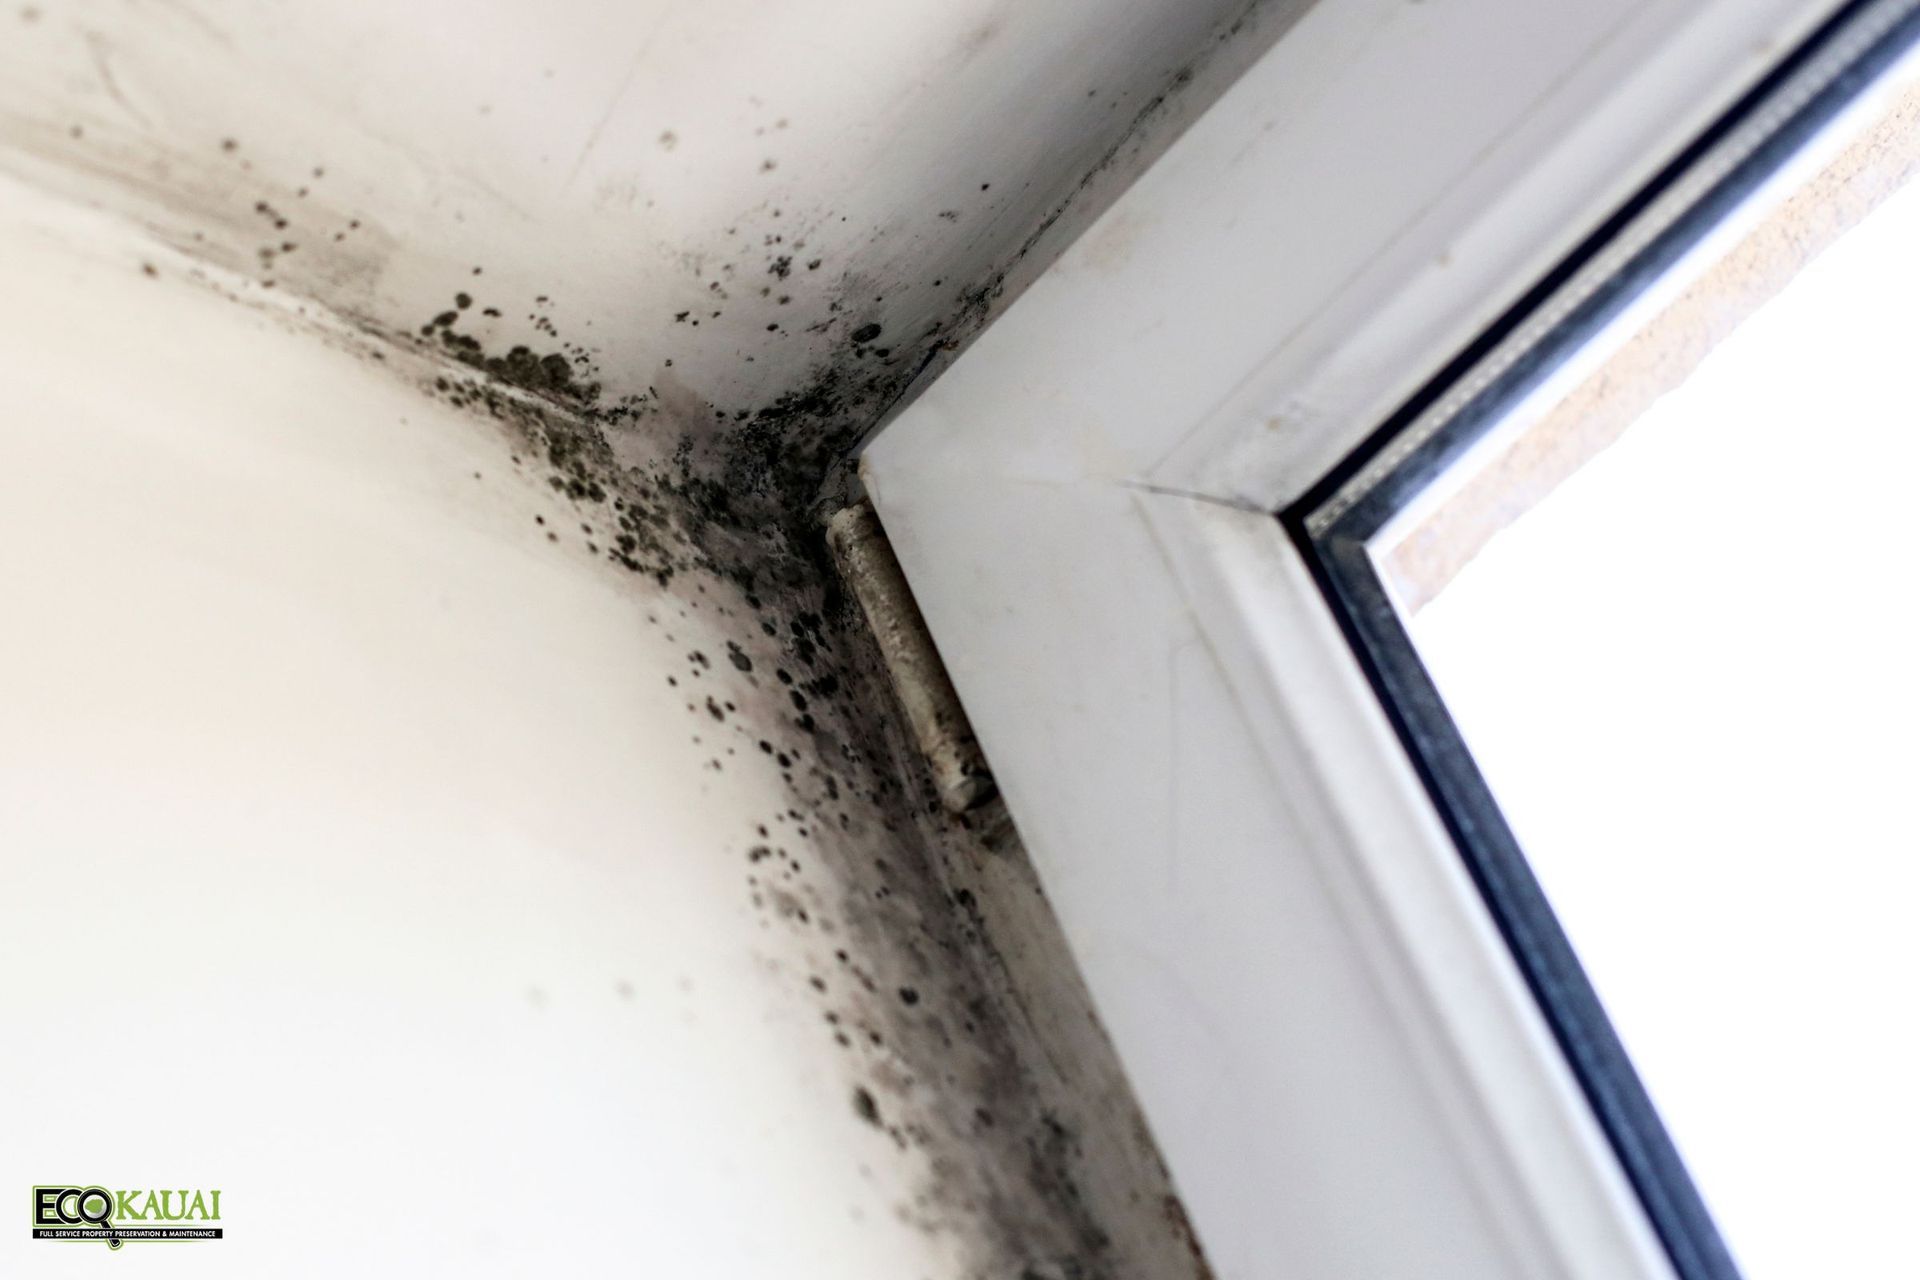 Visible mold growth on the window of a residential property in Hawaii that needs mold remediation